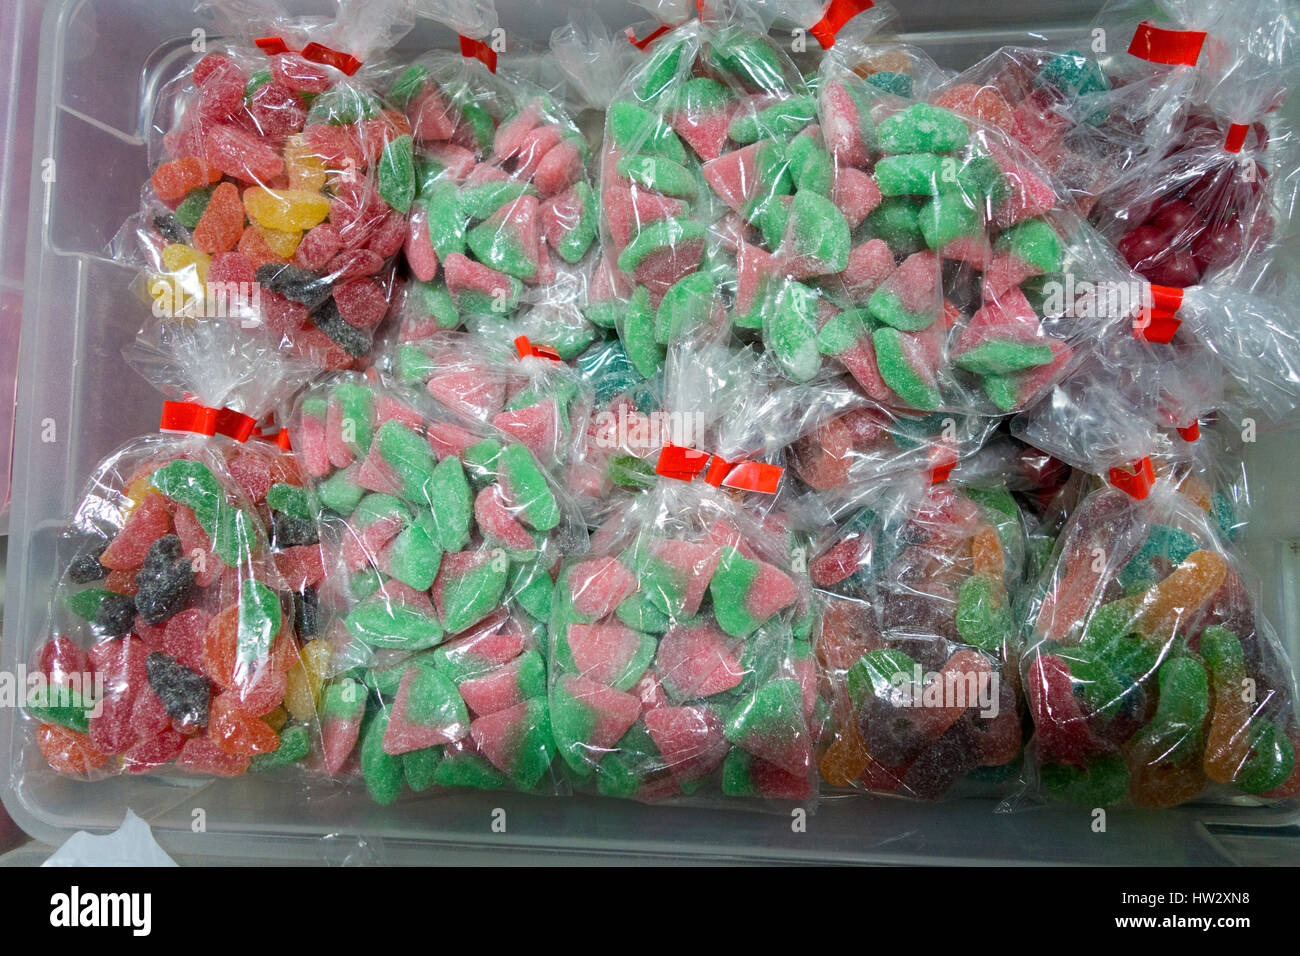 Bins of sugary sweets and candy for sale in bags Stock Photo